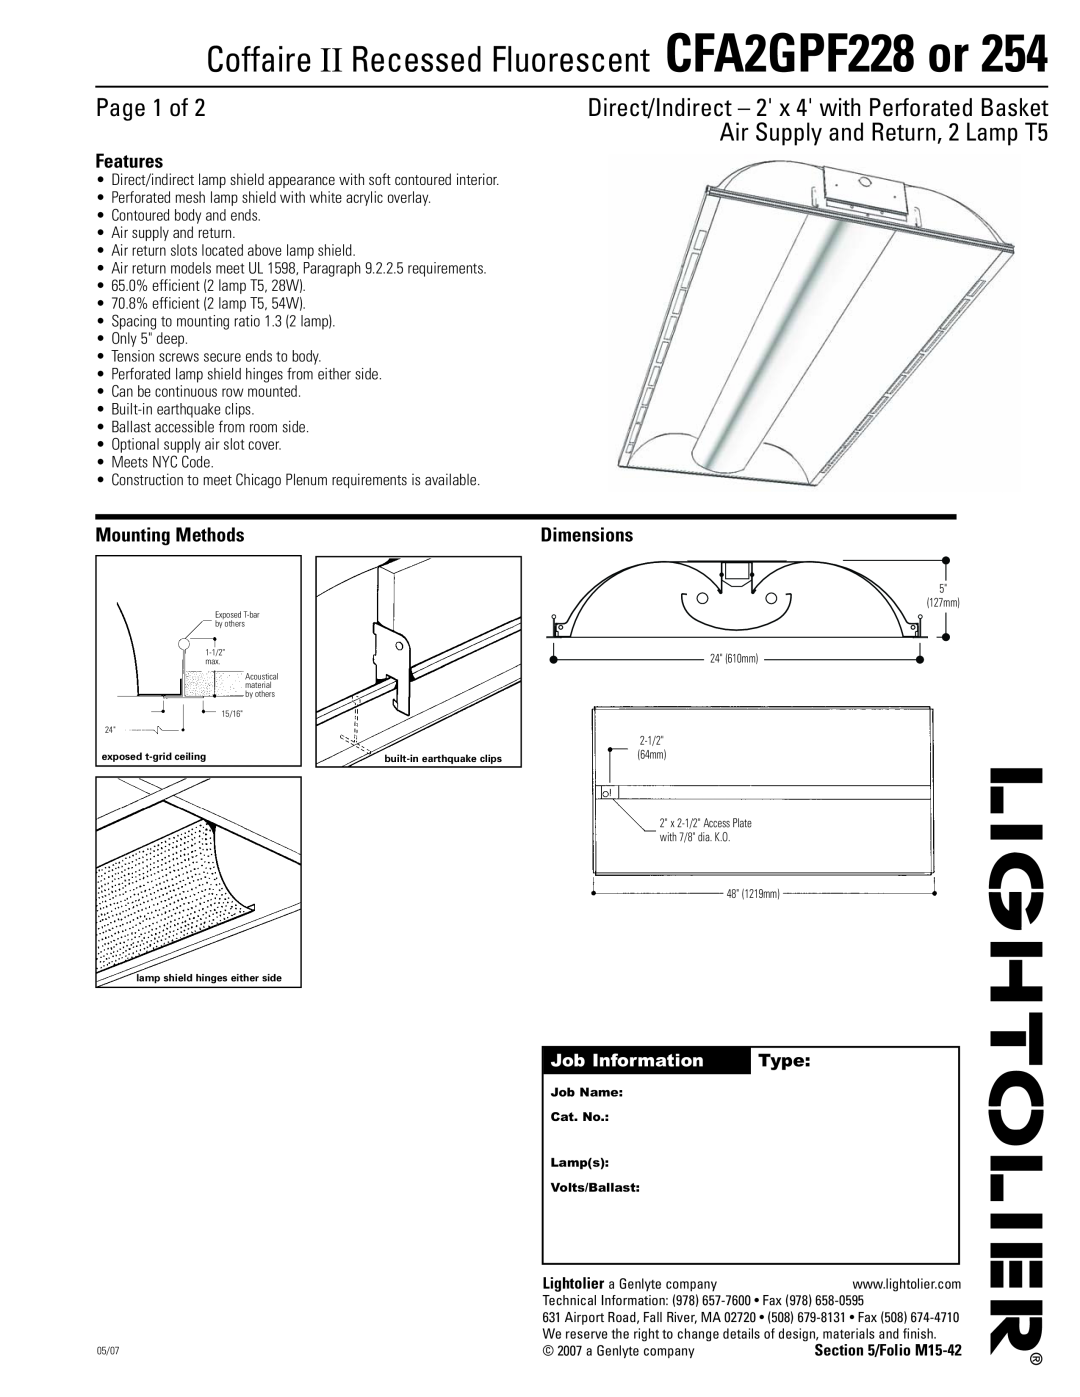 Lightolier CFA2GPF228 dimensions Page 1 of, Air Supply and Return, 2 Lamp T5, Features, Mounting Methods, Dimensions, Type 